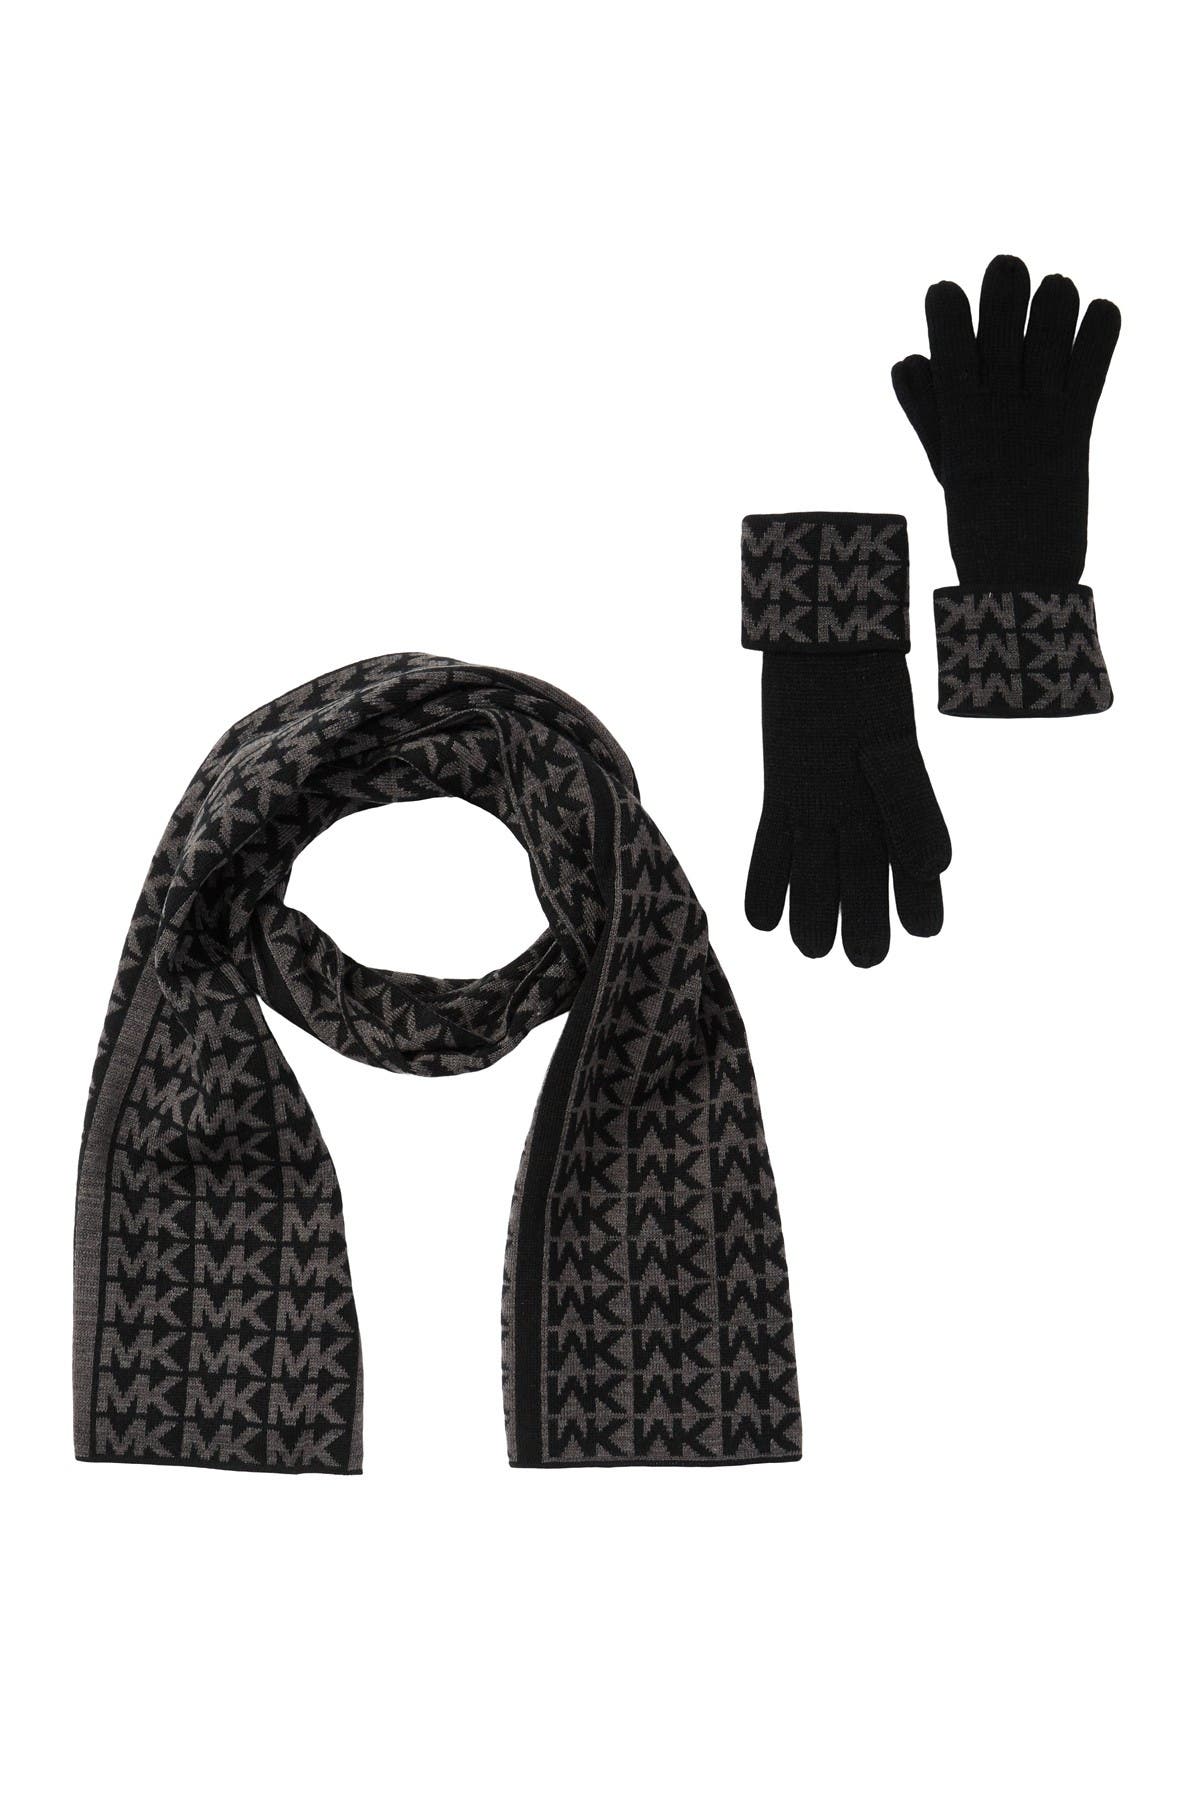 michael kors gloves and scarf set